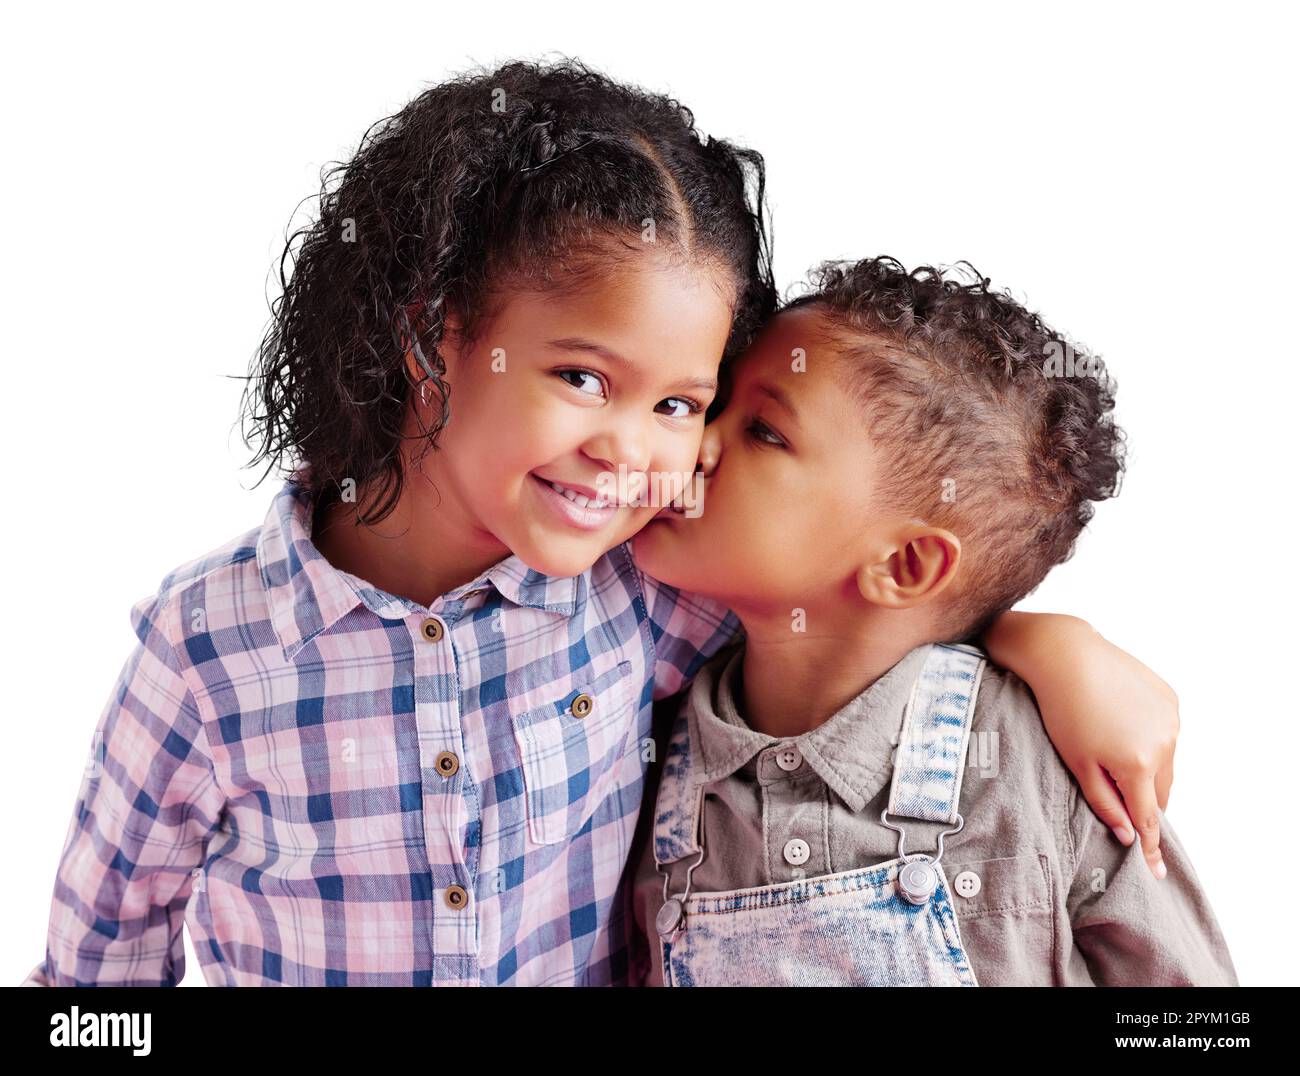 Children, brother and sister siblings kiss on cheek in family portrait with love and care. Kids, hug and smile together with support for boy and girl Stock Photo